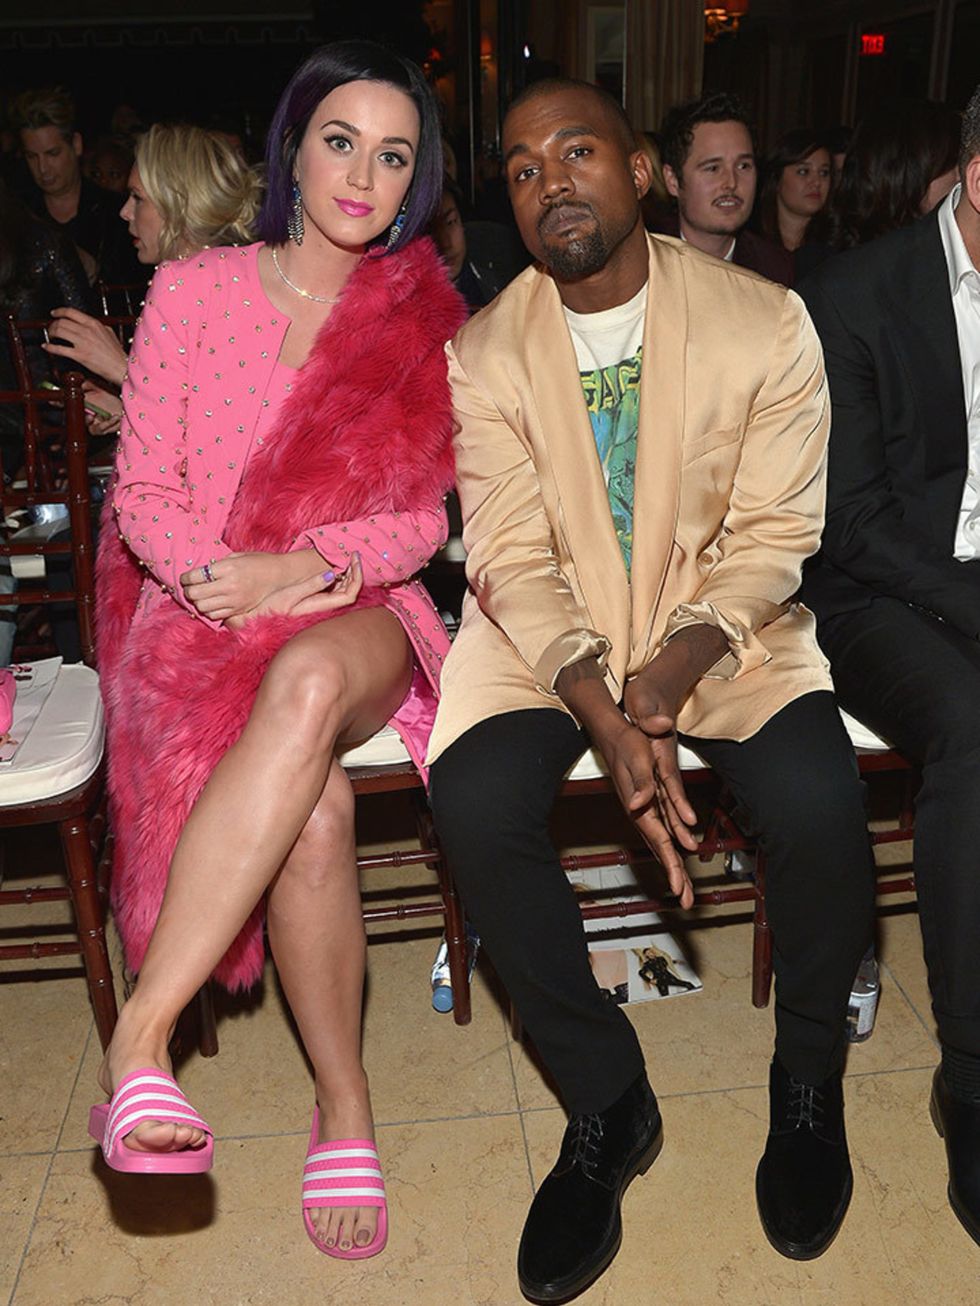 Kanye without Kim. 
Spotted Katy Perry's pink slides? We die.